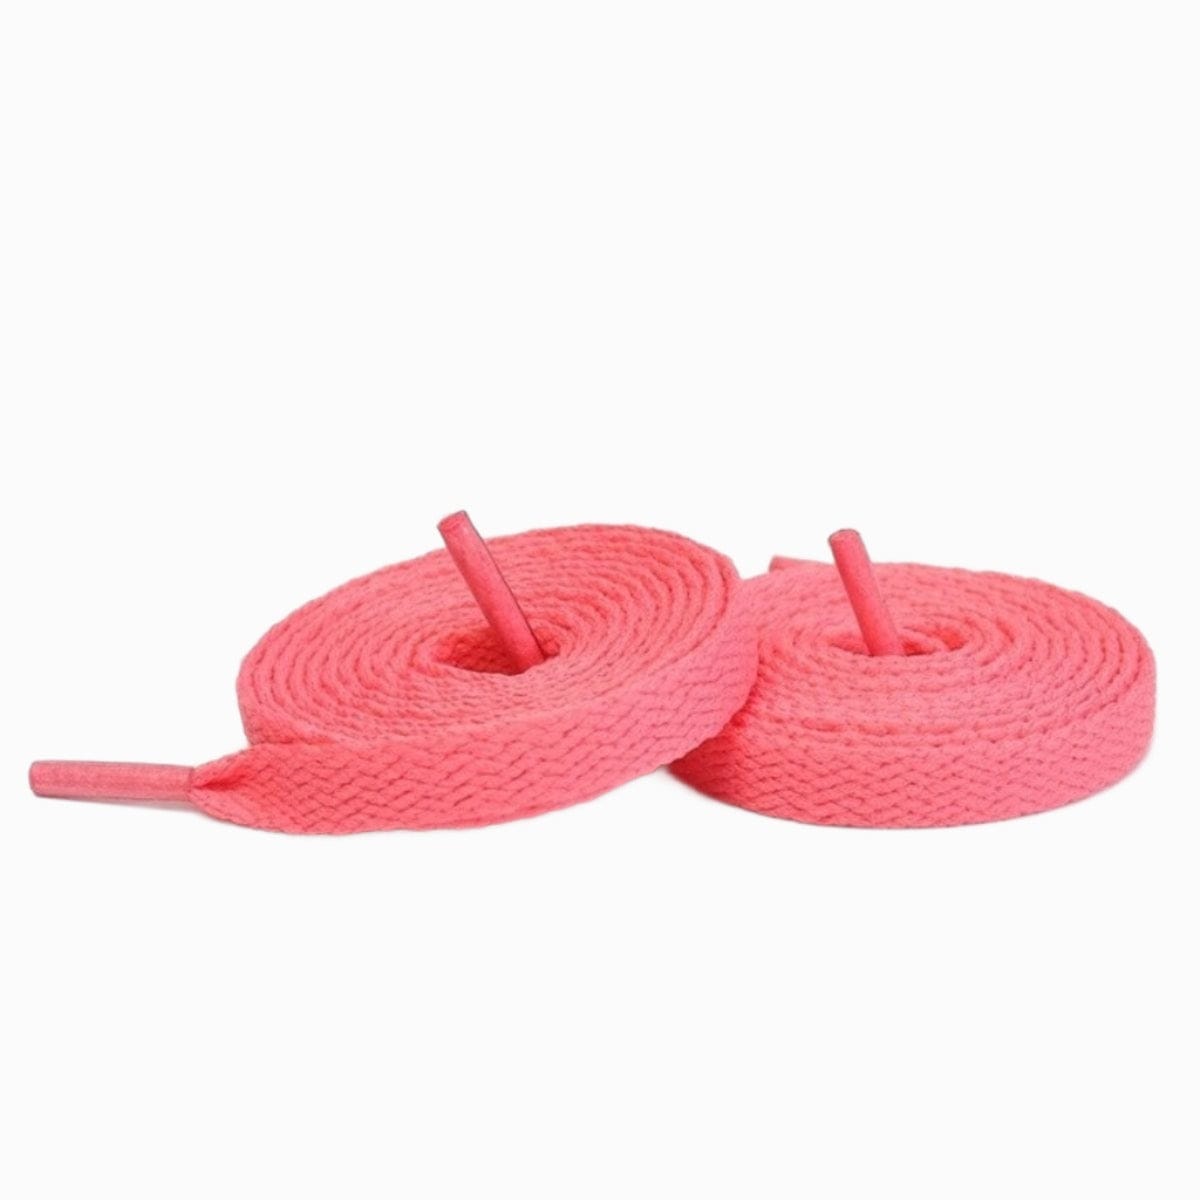 Watermelon Red Replacement Shoe Laces for Adidas Handball Spezial Sneakers by Kicks Shoelaces